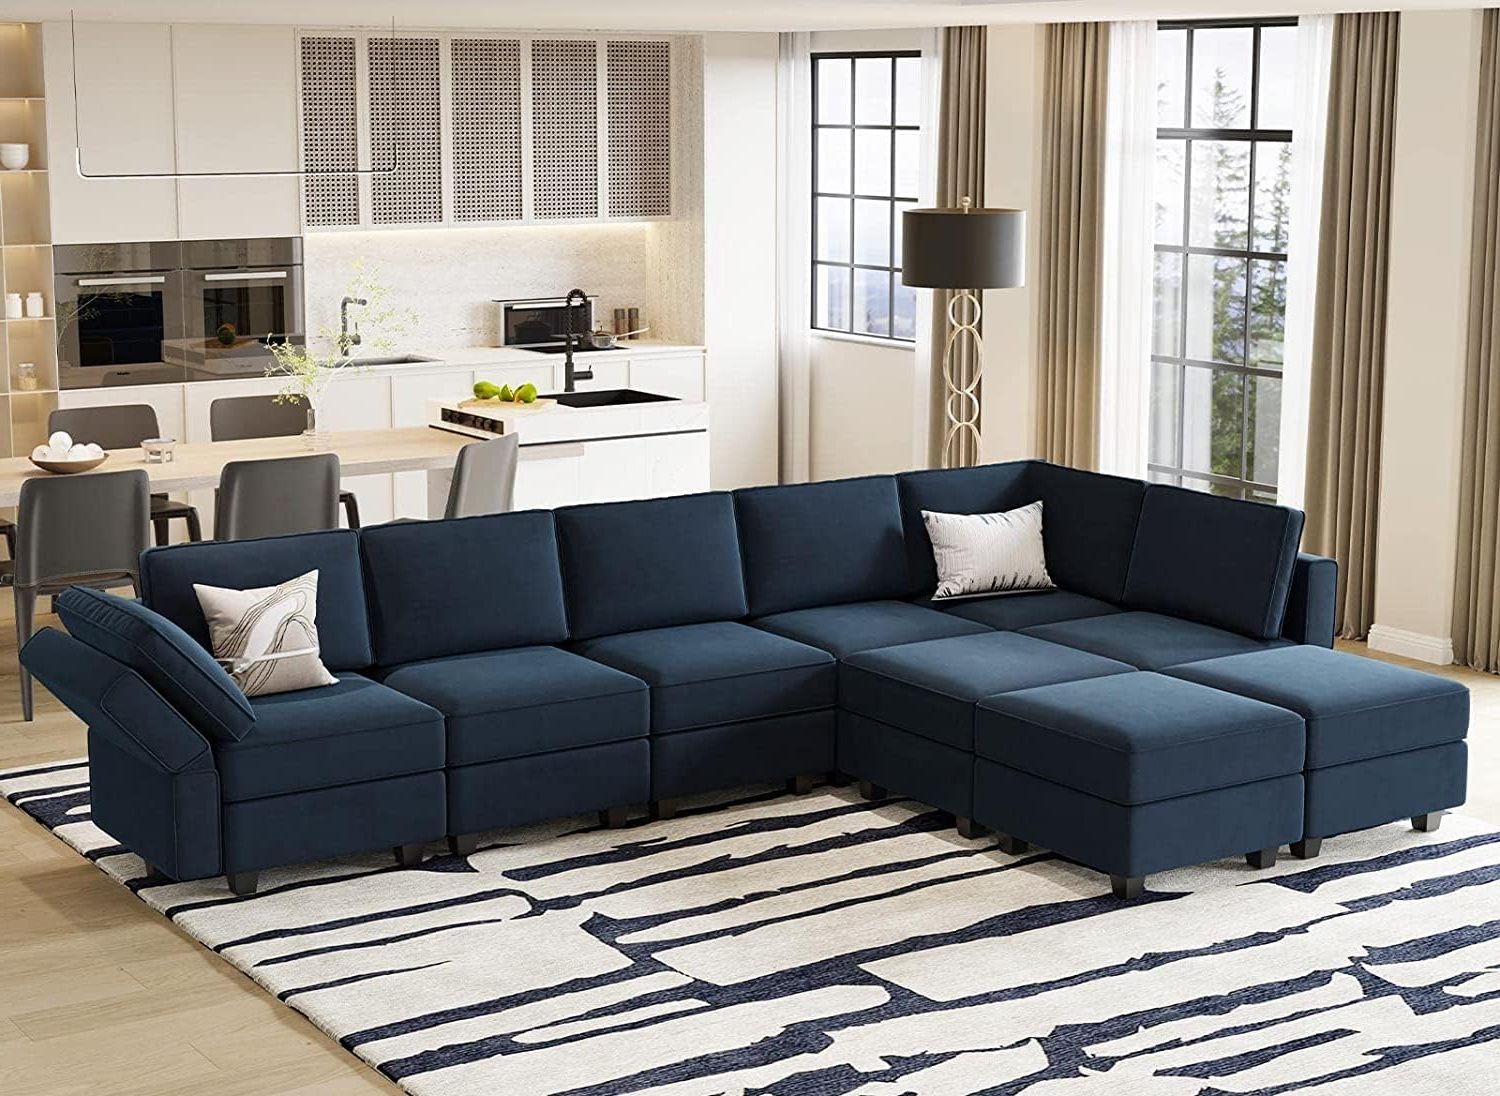 Most Recently Released L Shape Couches With Reversible Chaises Throughout Amazon: Modular Sectional Sofa Couch With Reversible Double Chaises (View 10 of 15)